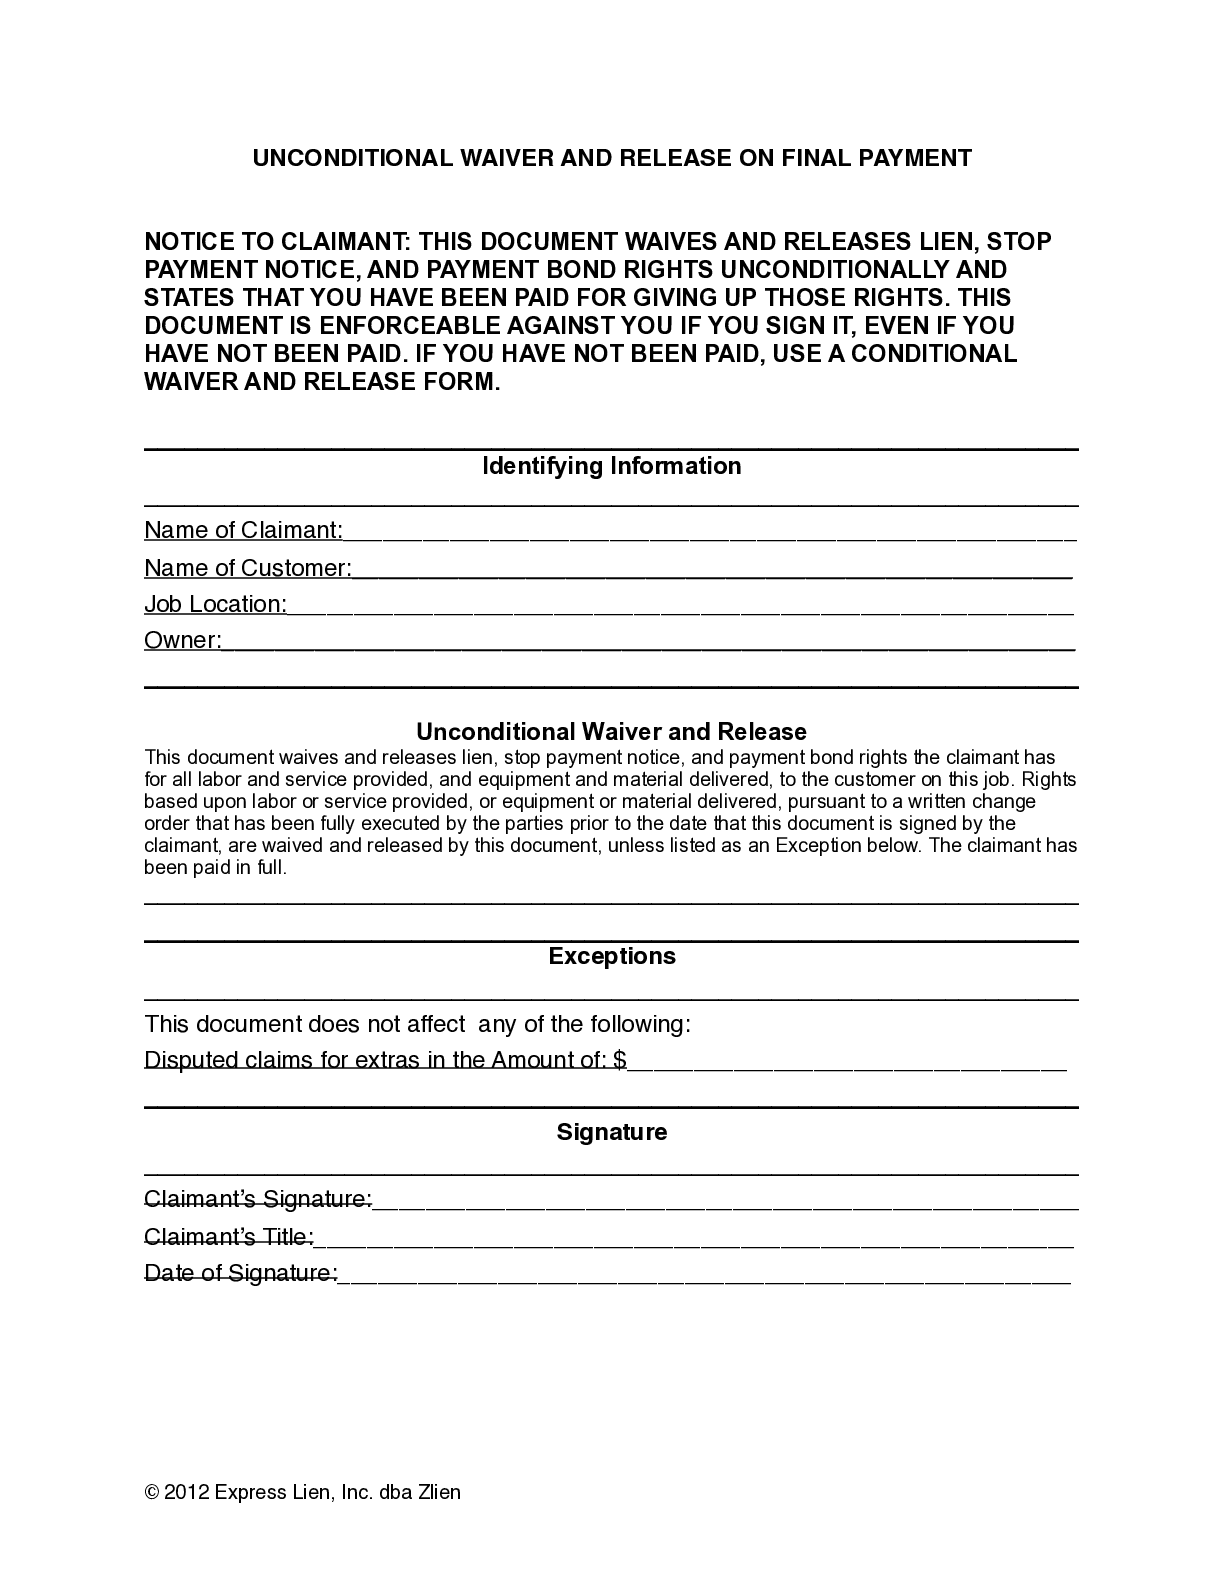 Delaware Final Unconditional Lien Waiver Form - free from